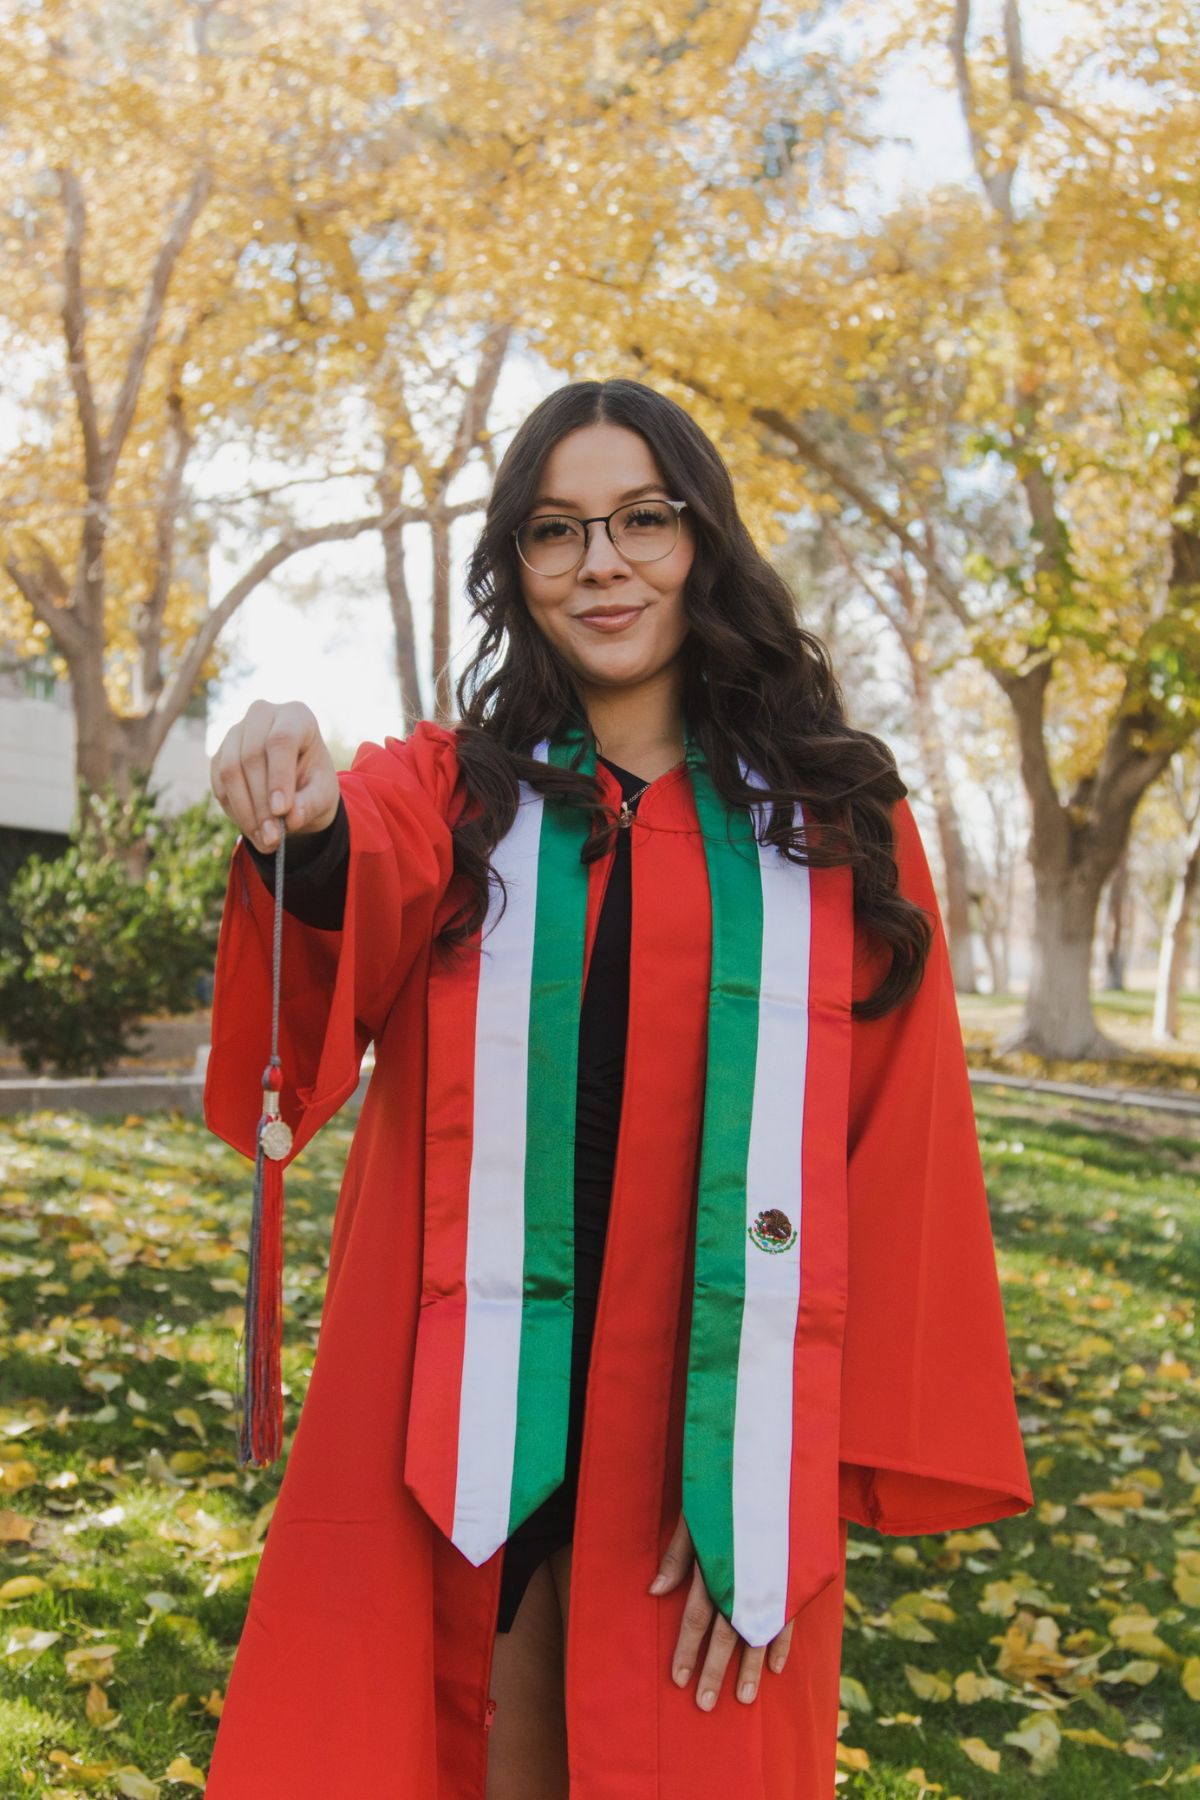 Alejandra has long dark brown hair and is in a red cap and gown with a red, white, and green sash.